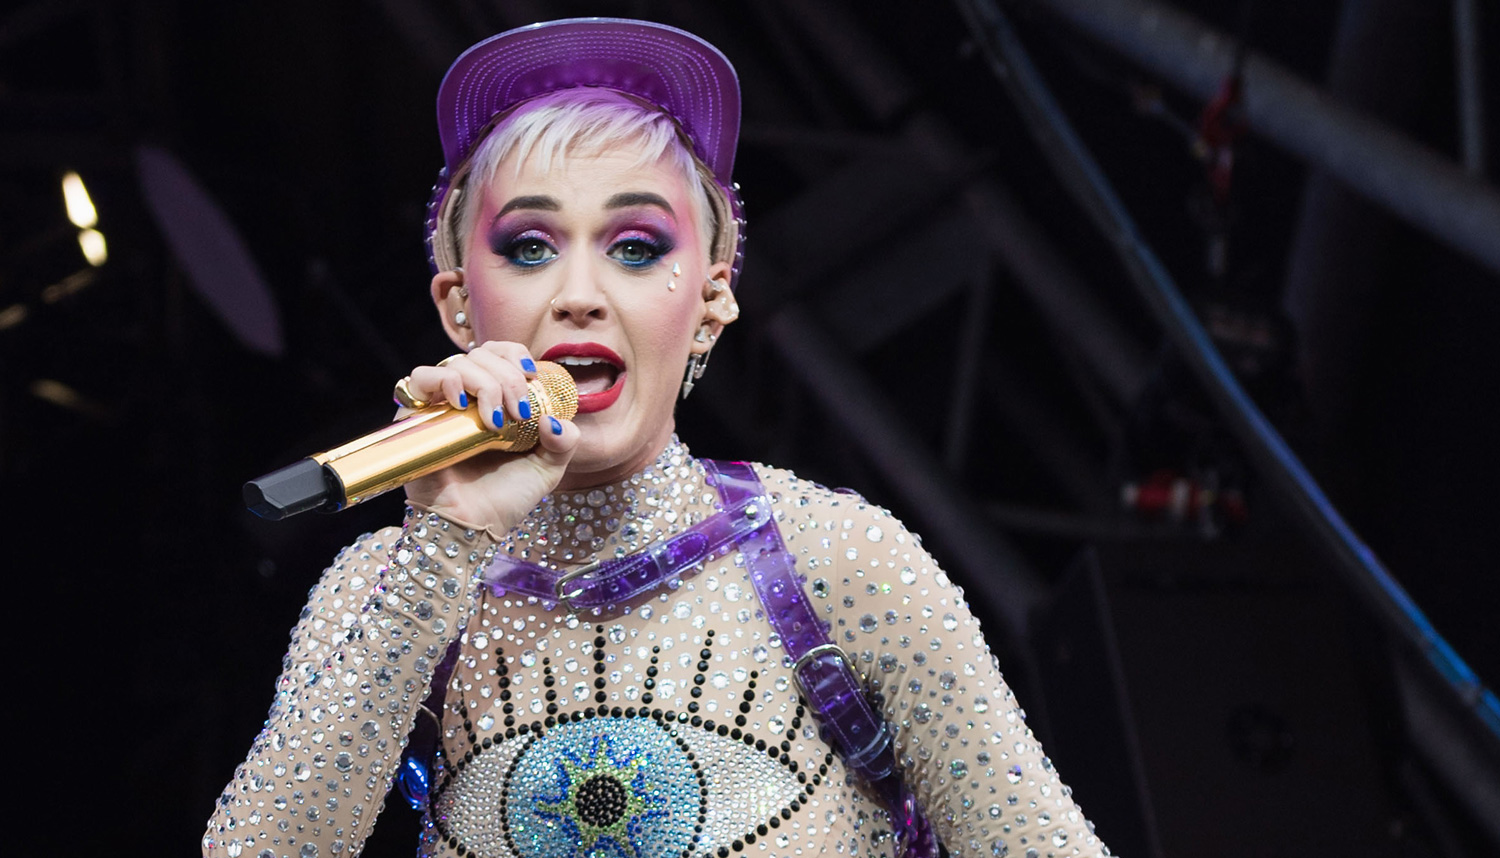 Katy Perry Crowd Surfed at the End of Her Glastonbury Set!